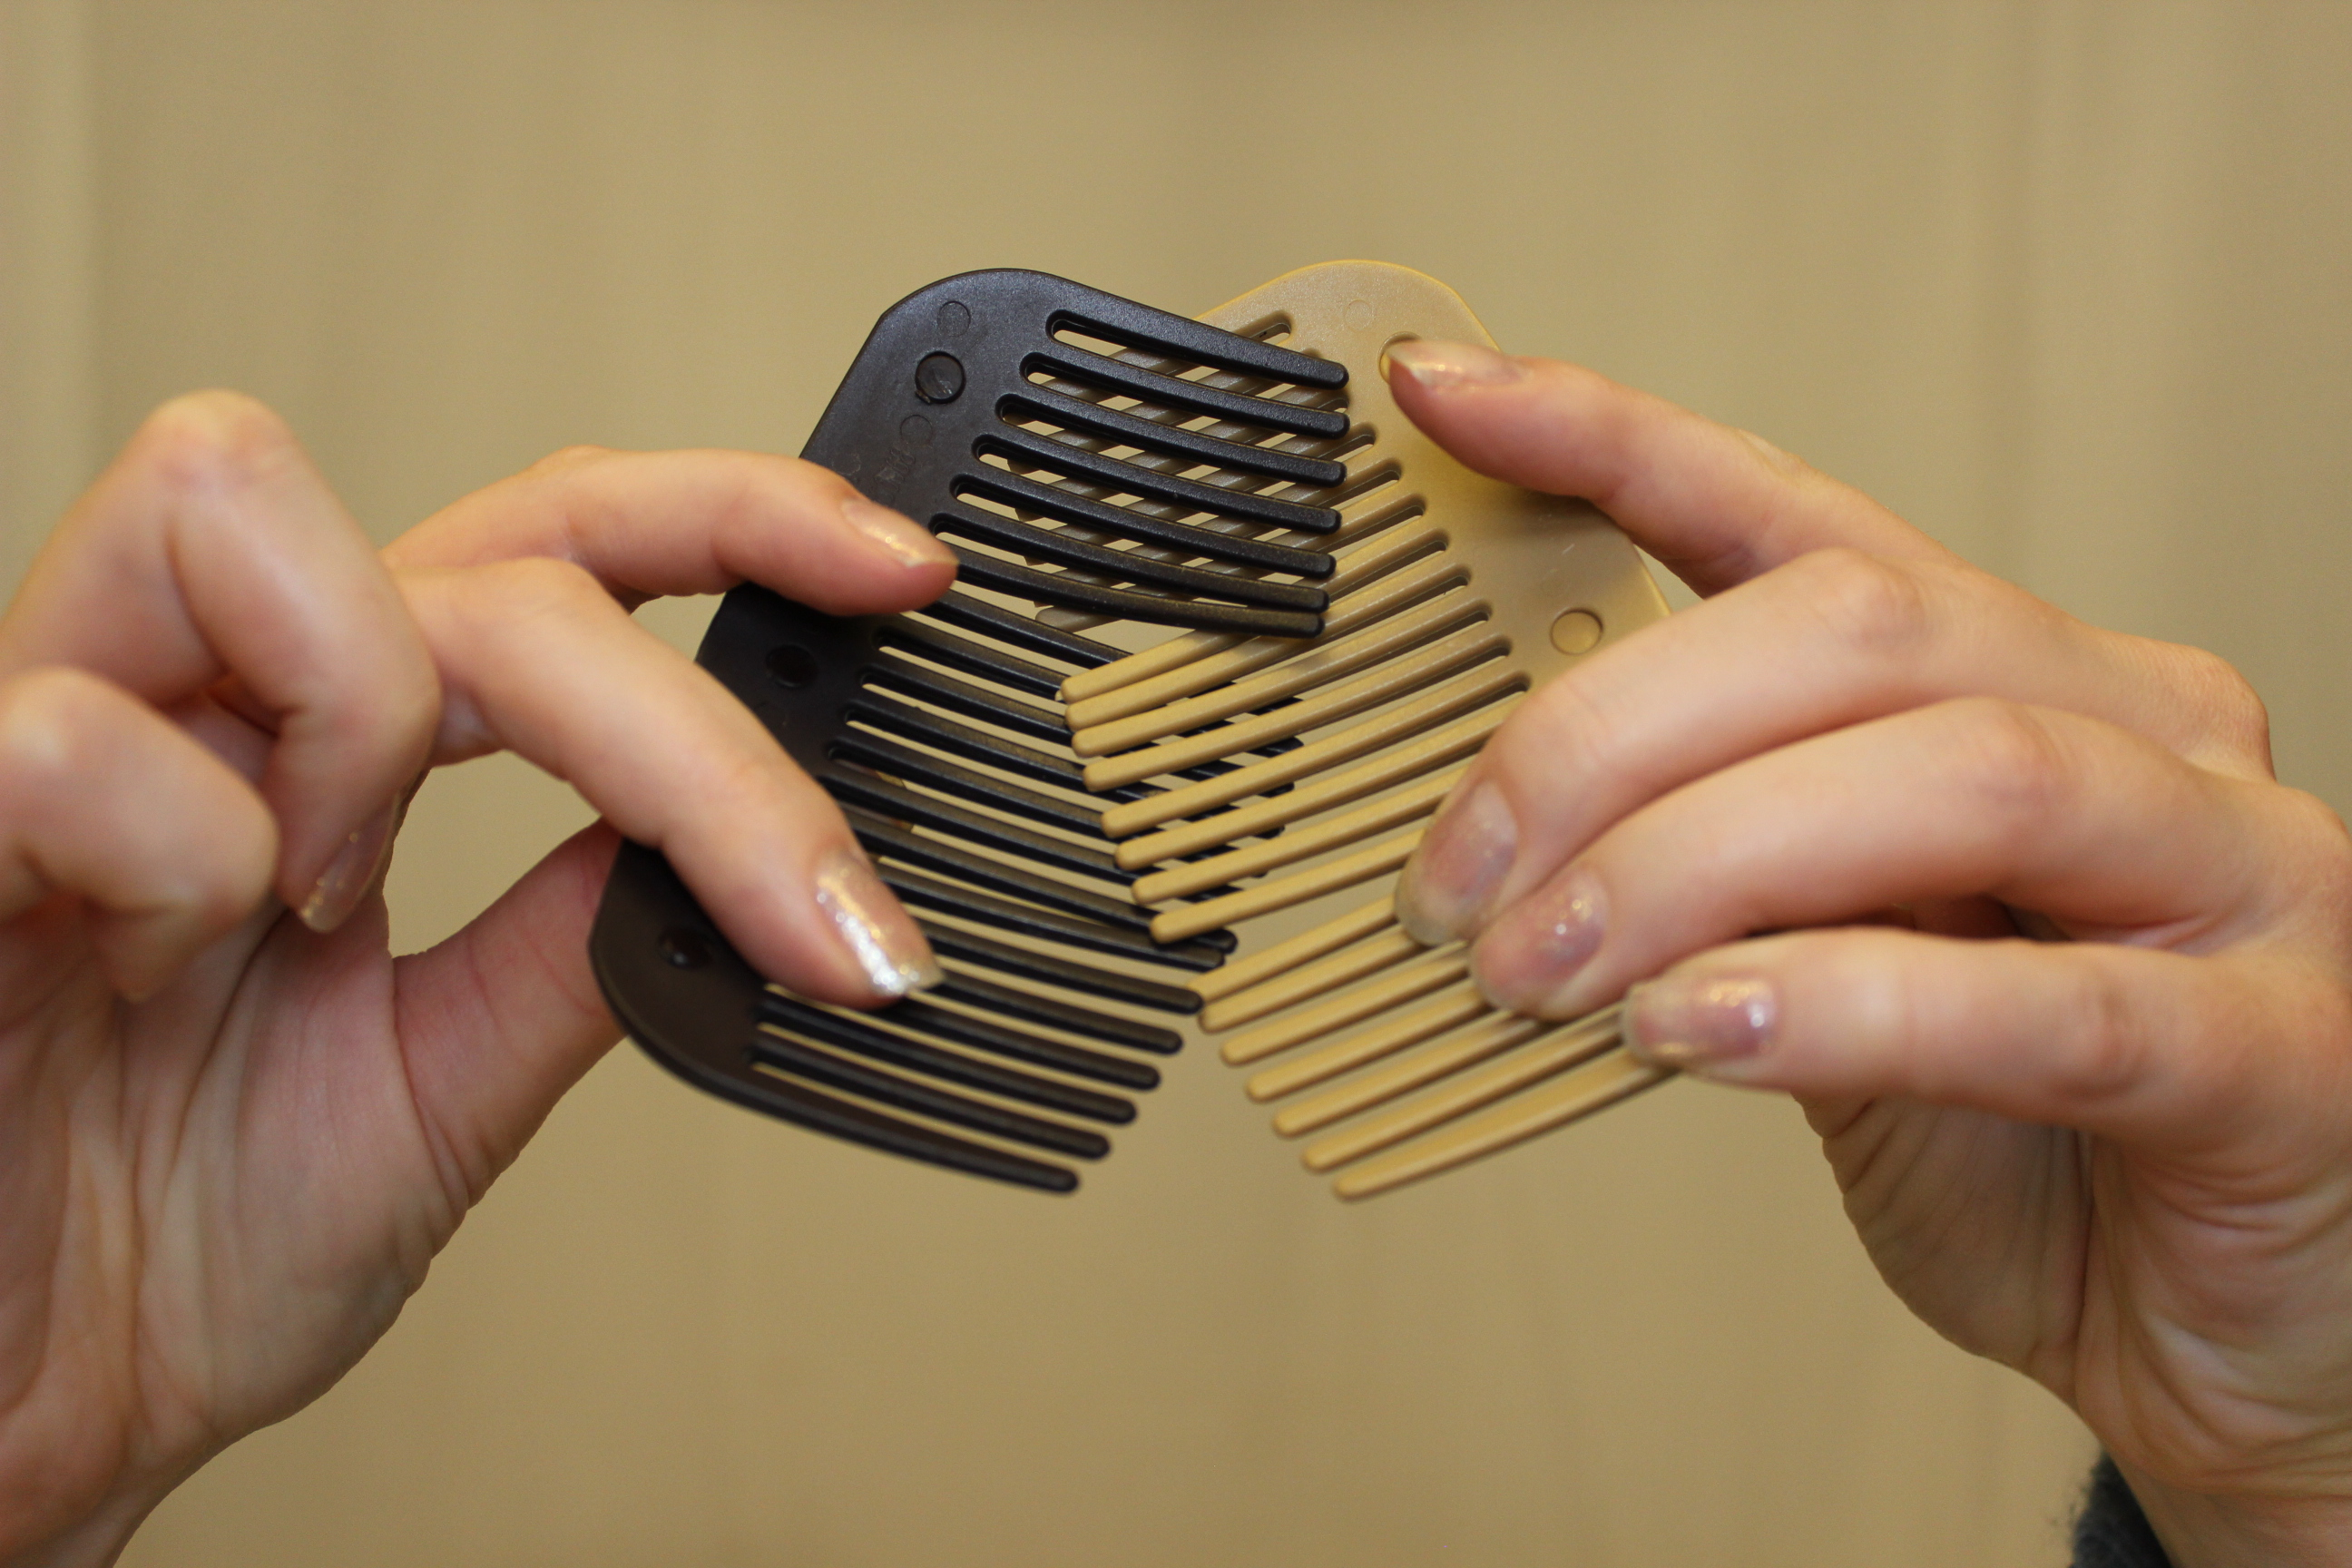 How to interlock the combs 2